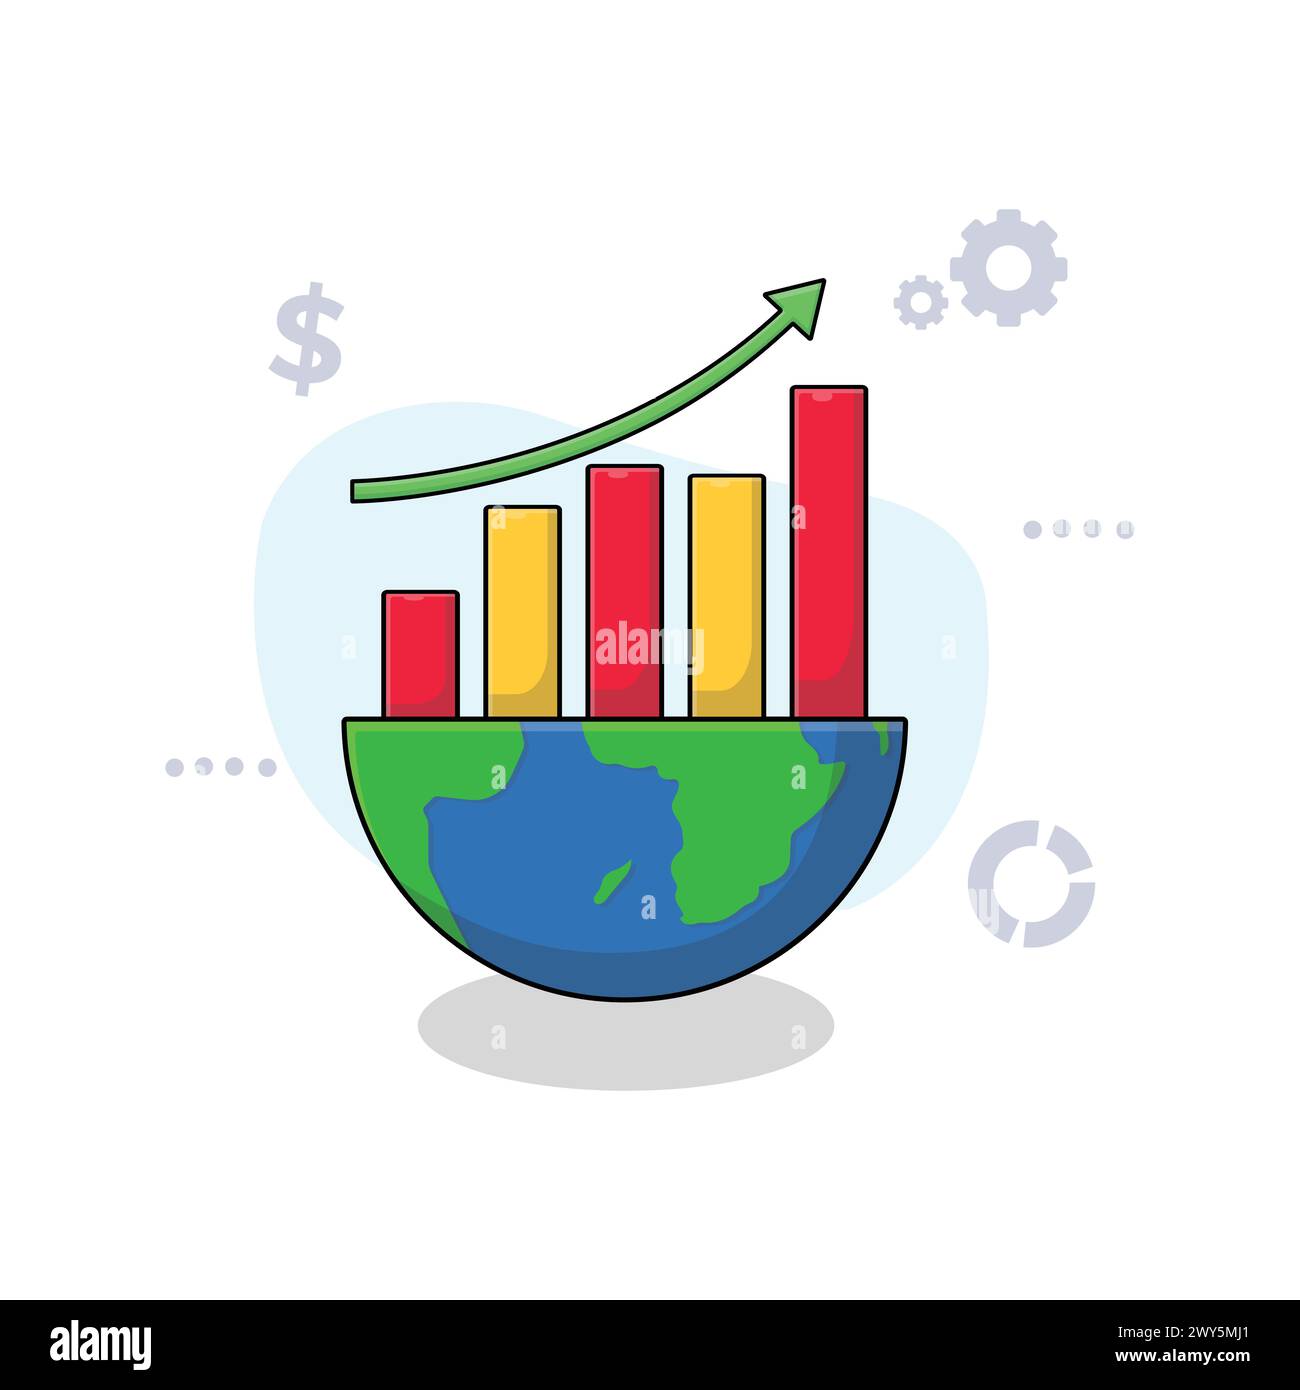 Global Economy Growth Concept Illustration Stock Vector